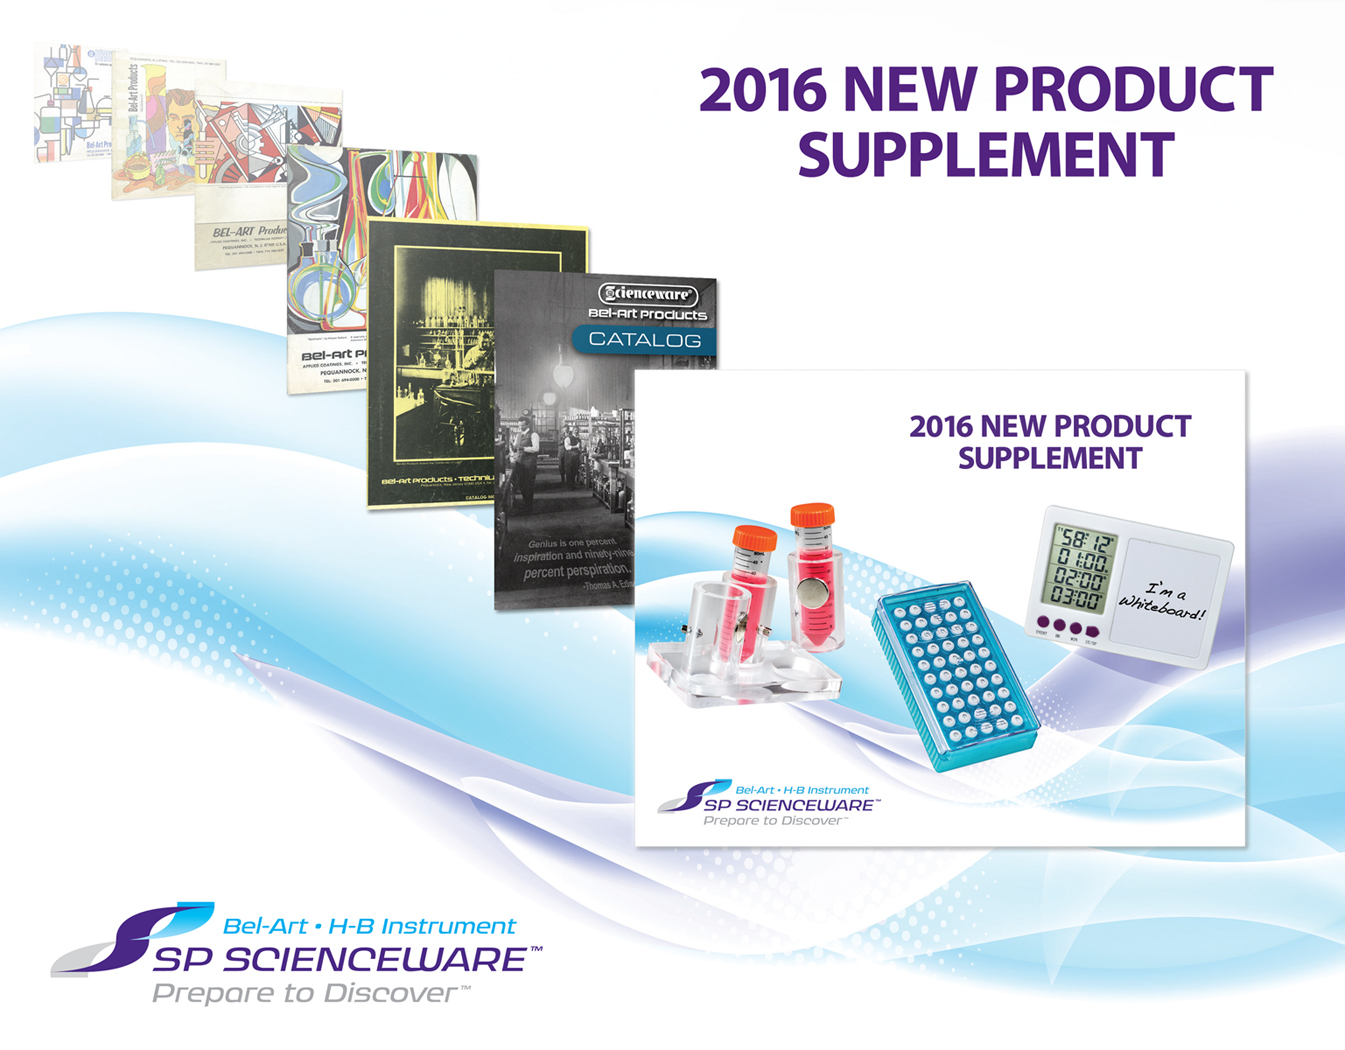 Download the 2016 New Product Supplement at Belart.com/Catalogs